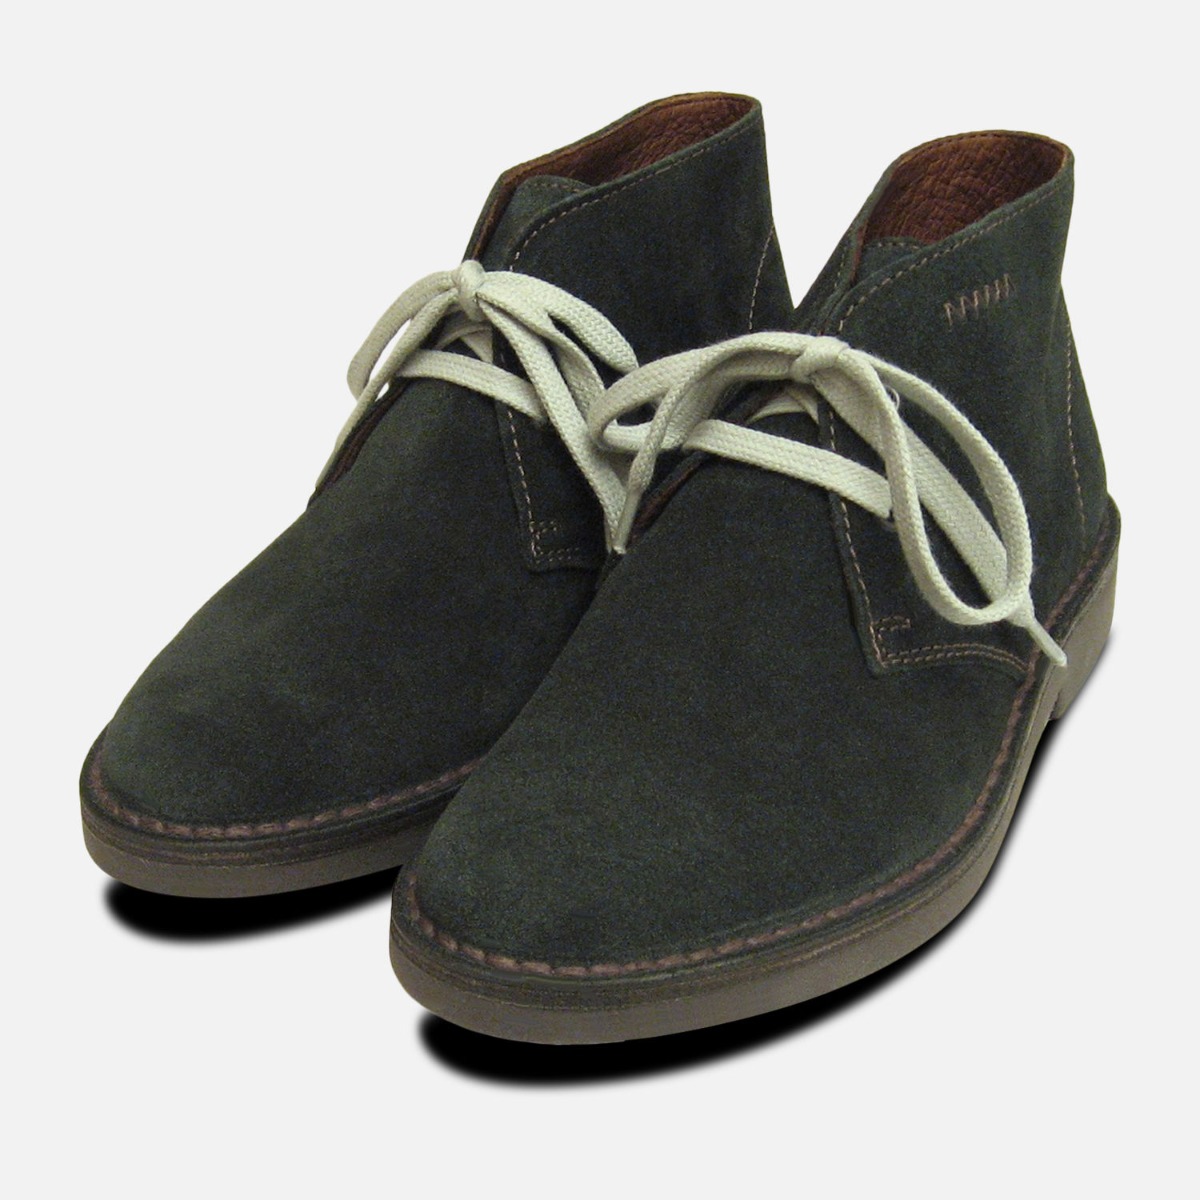 green suede boots women's shoes